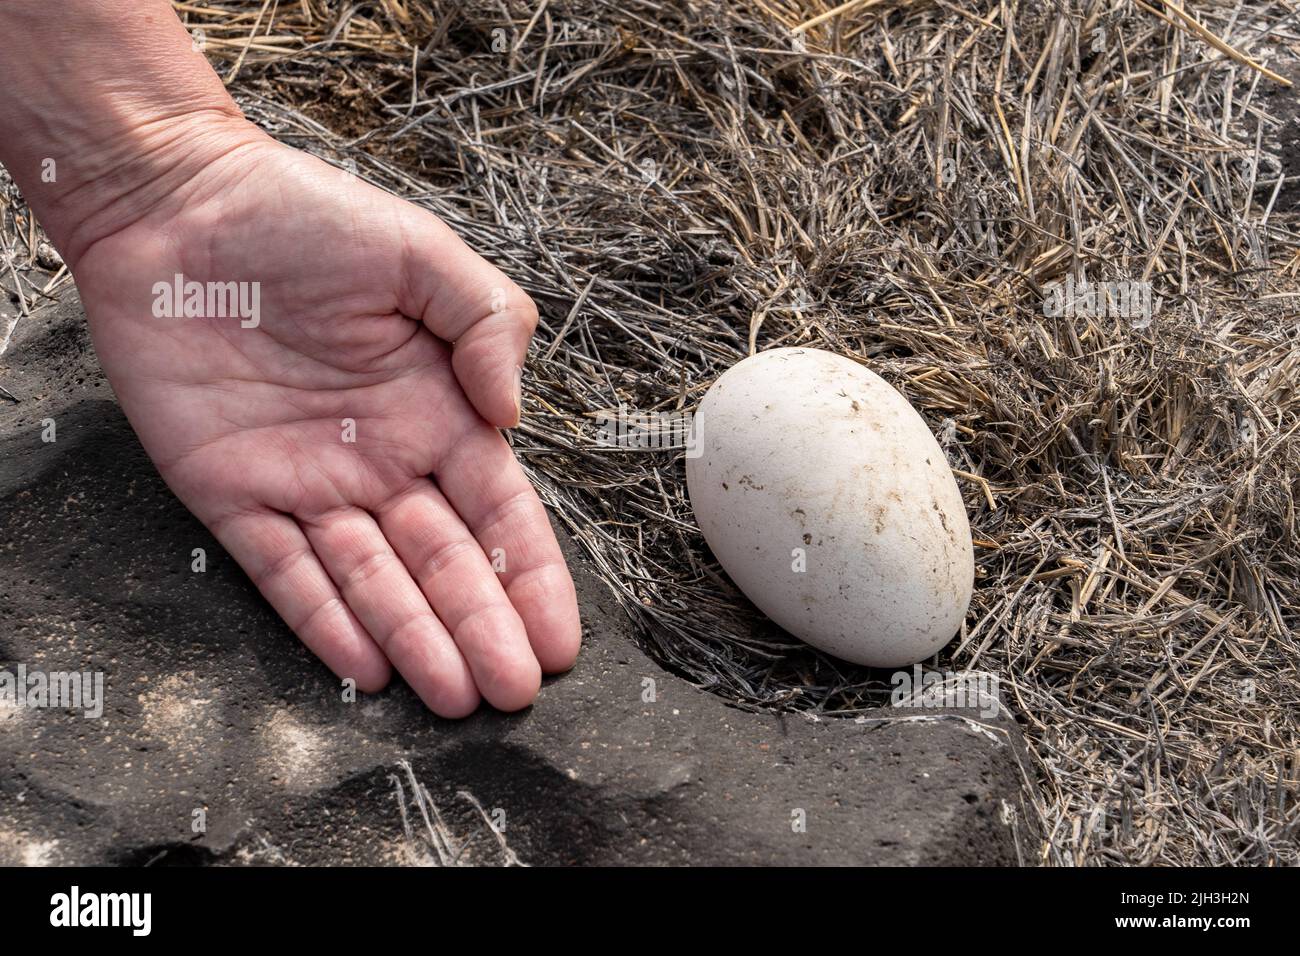 Large egg abandoned by Albatross in the Galapagos with hand next to it to show the size Stock Photo